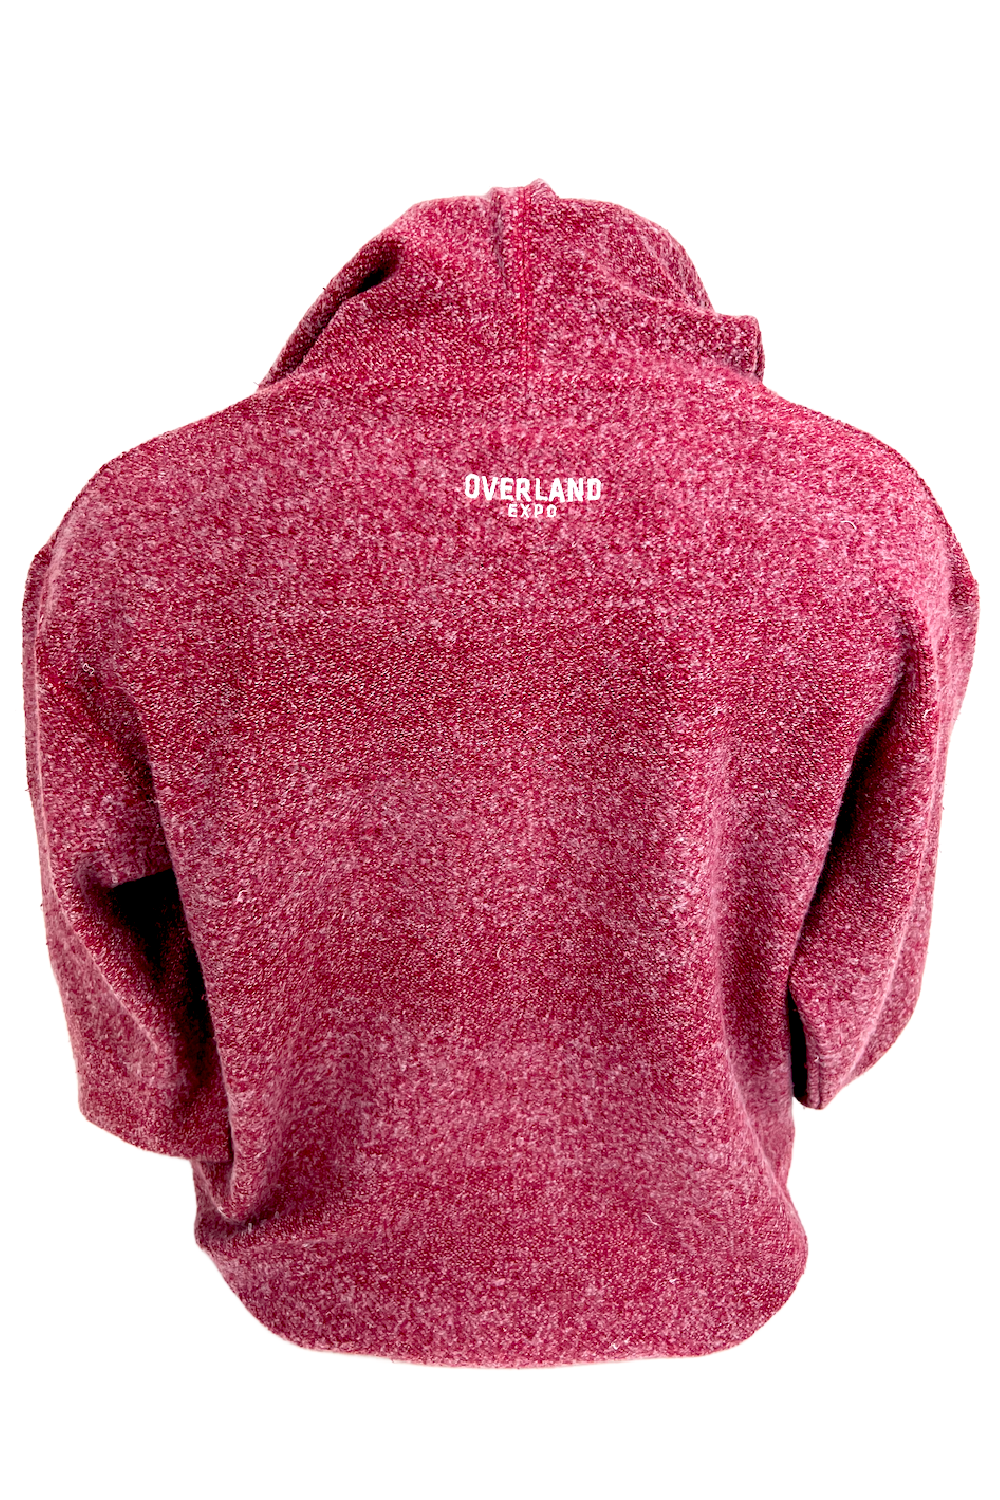 OE Compass - Women's Red Heather Pullover Hoodie